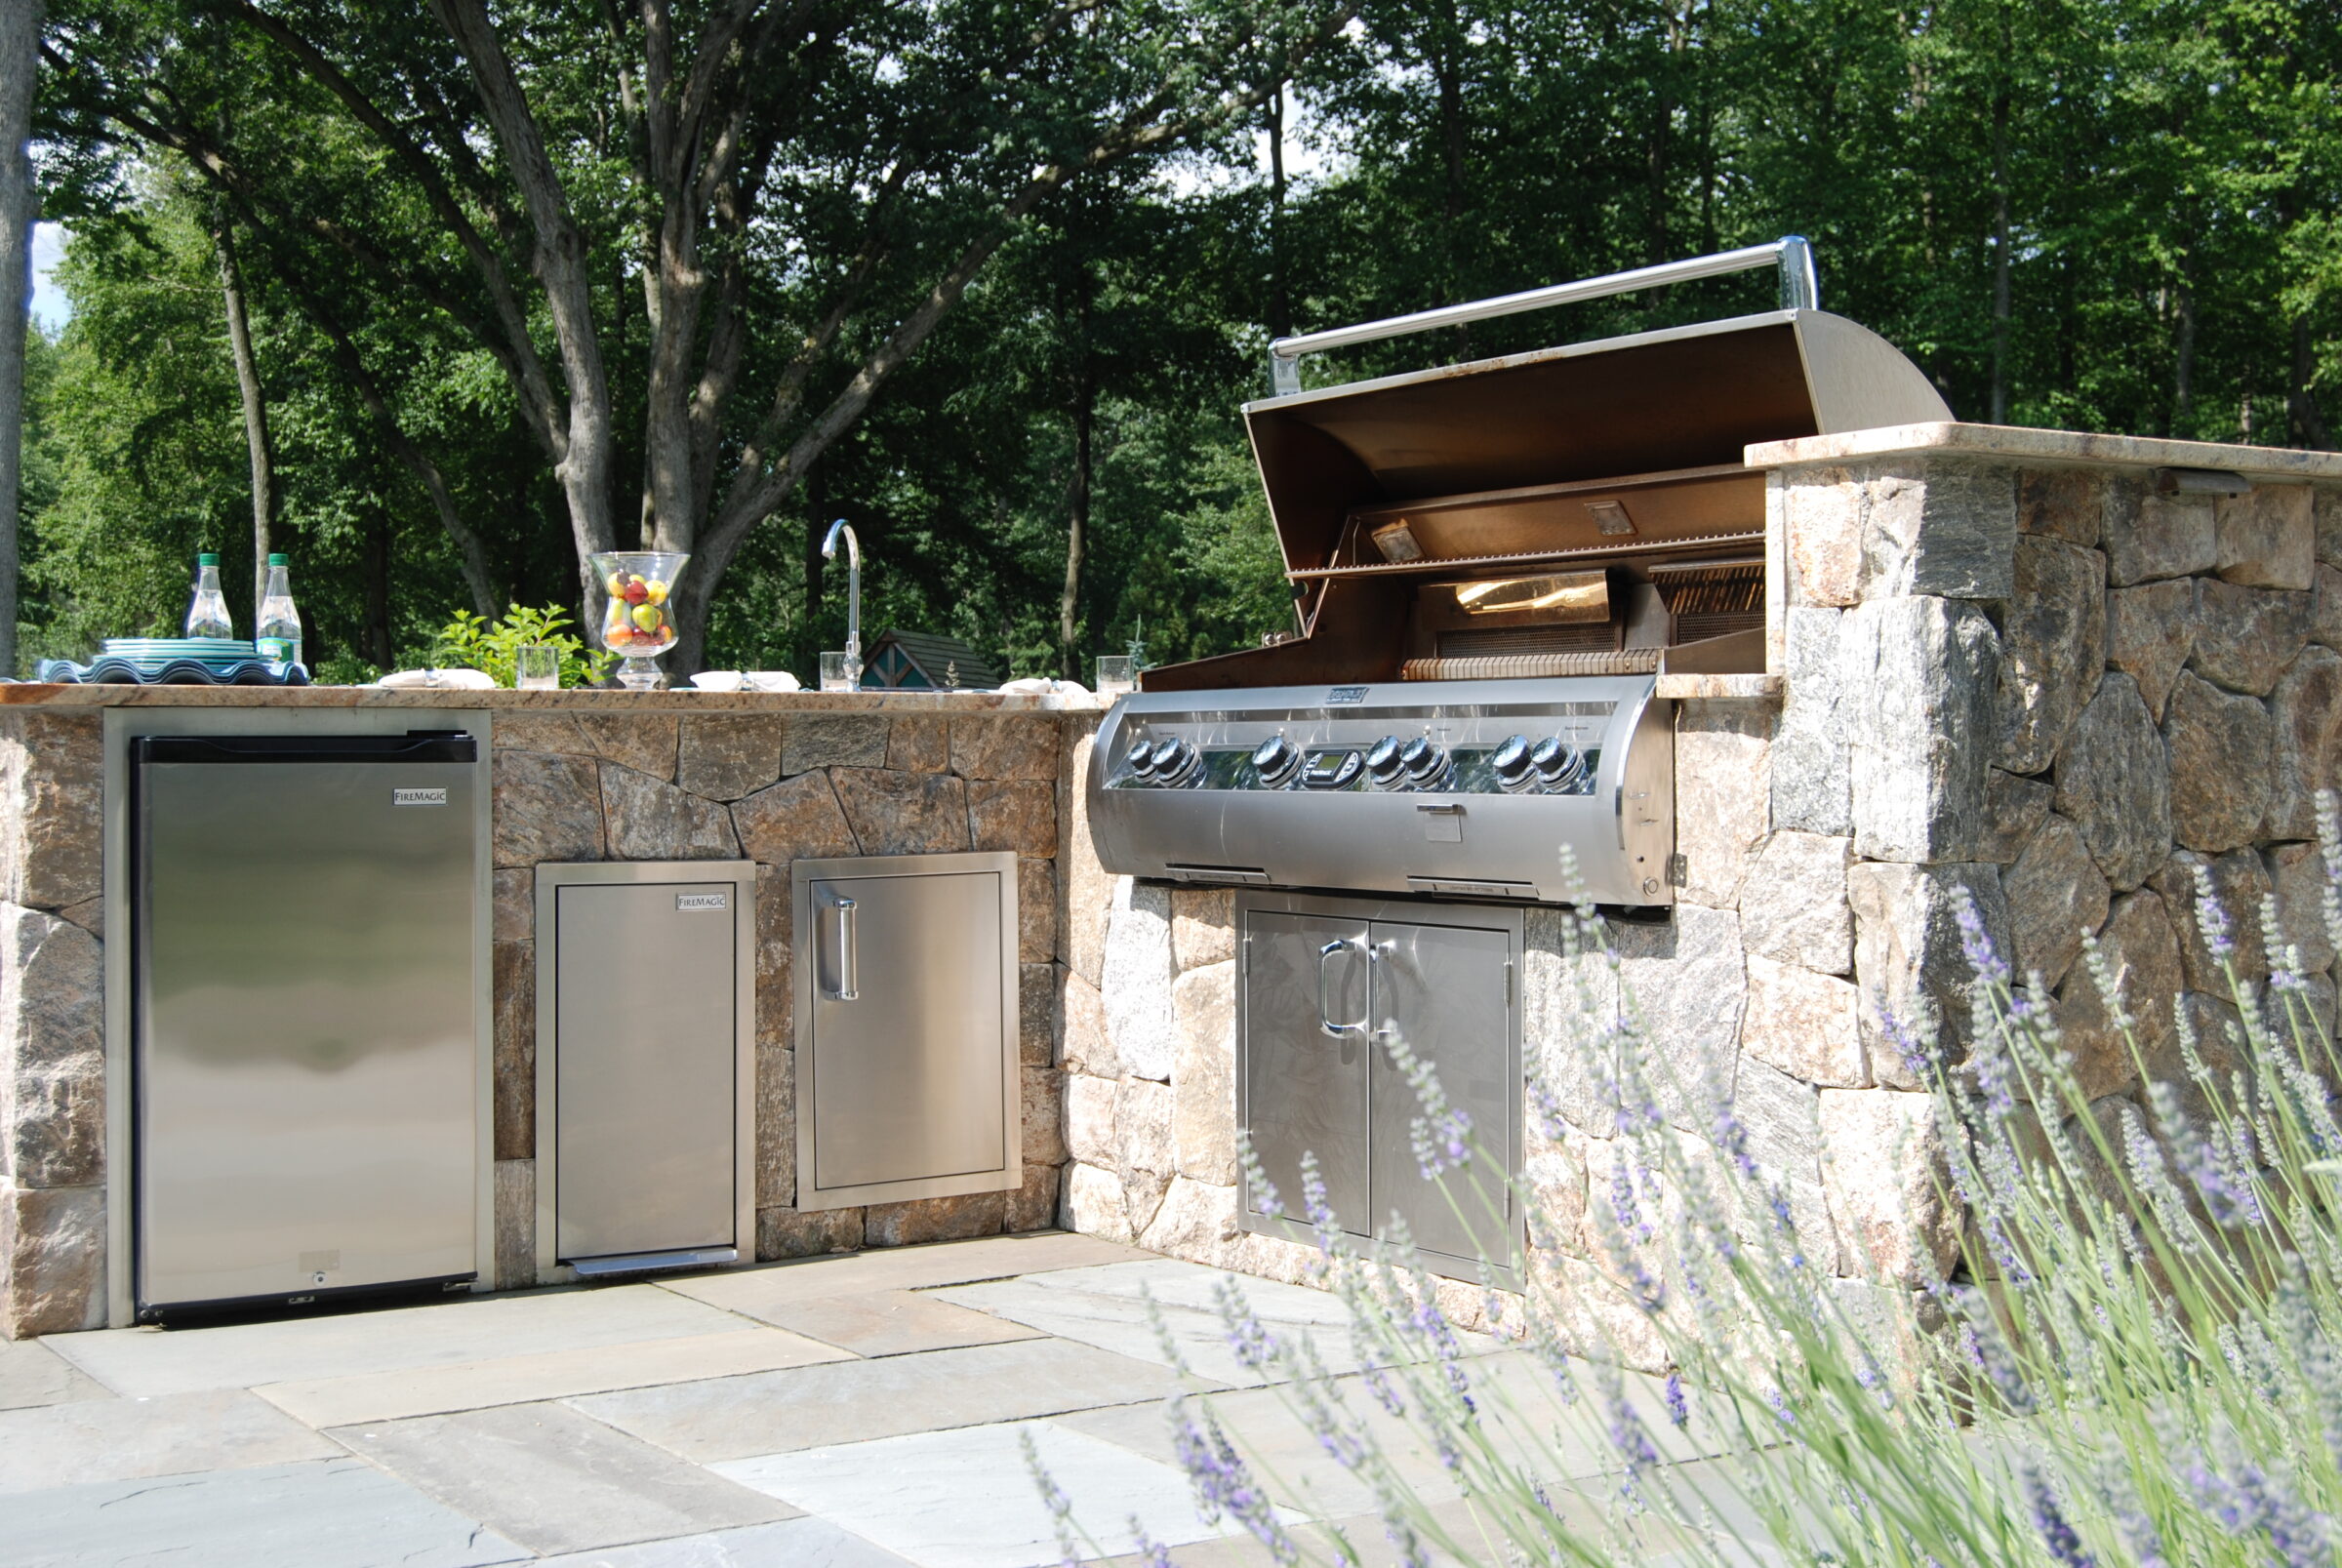 This image shows an outdoor kitchen with a built-in grill, refrigerator, and storage cabinets, set against a backdrop of trees and a clear sky.